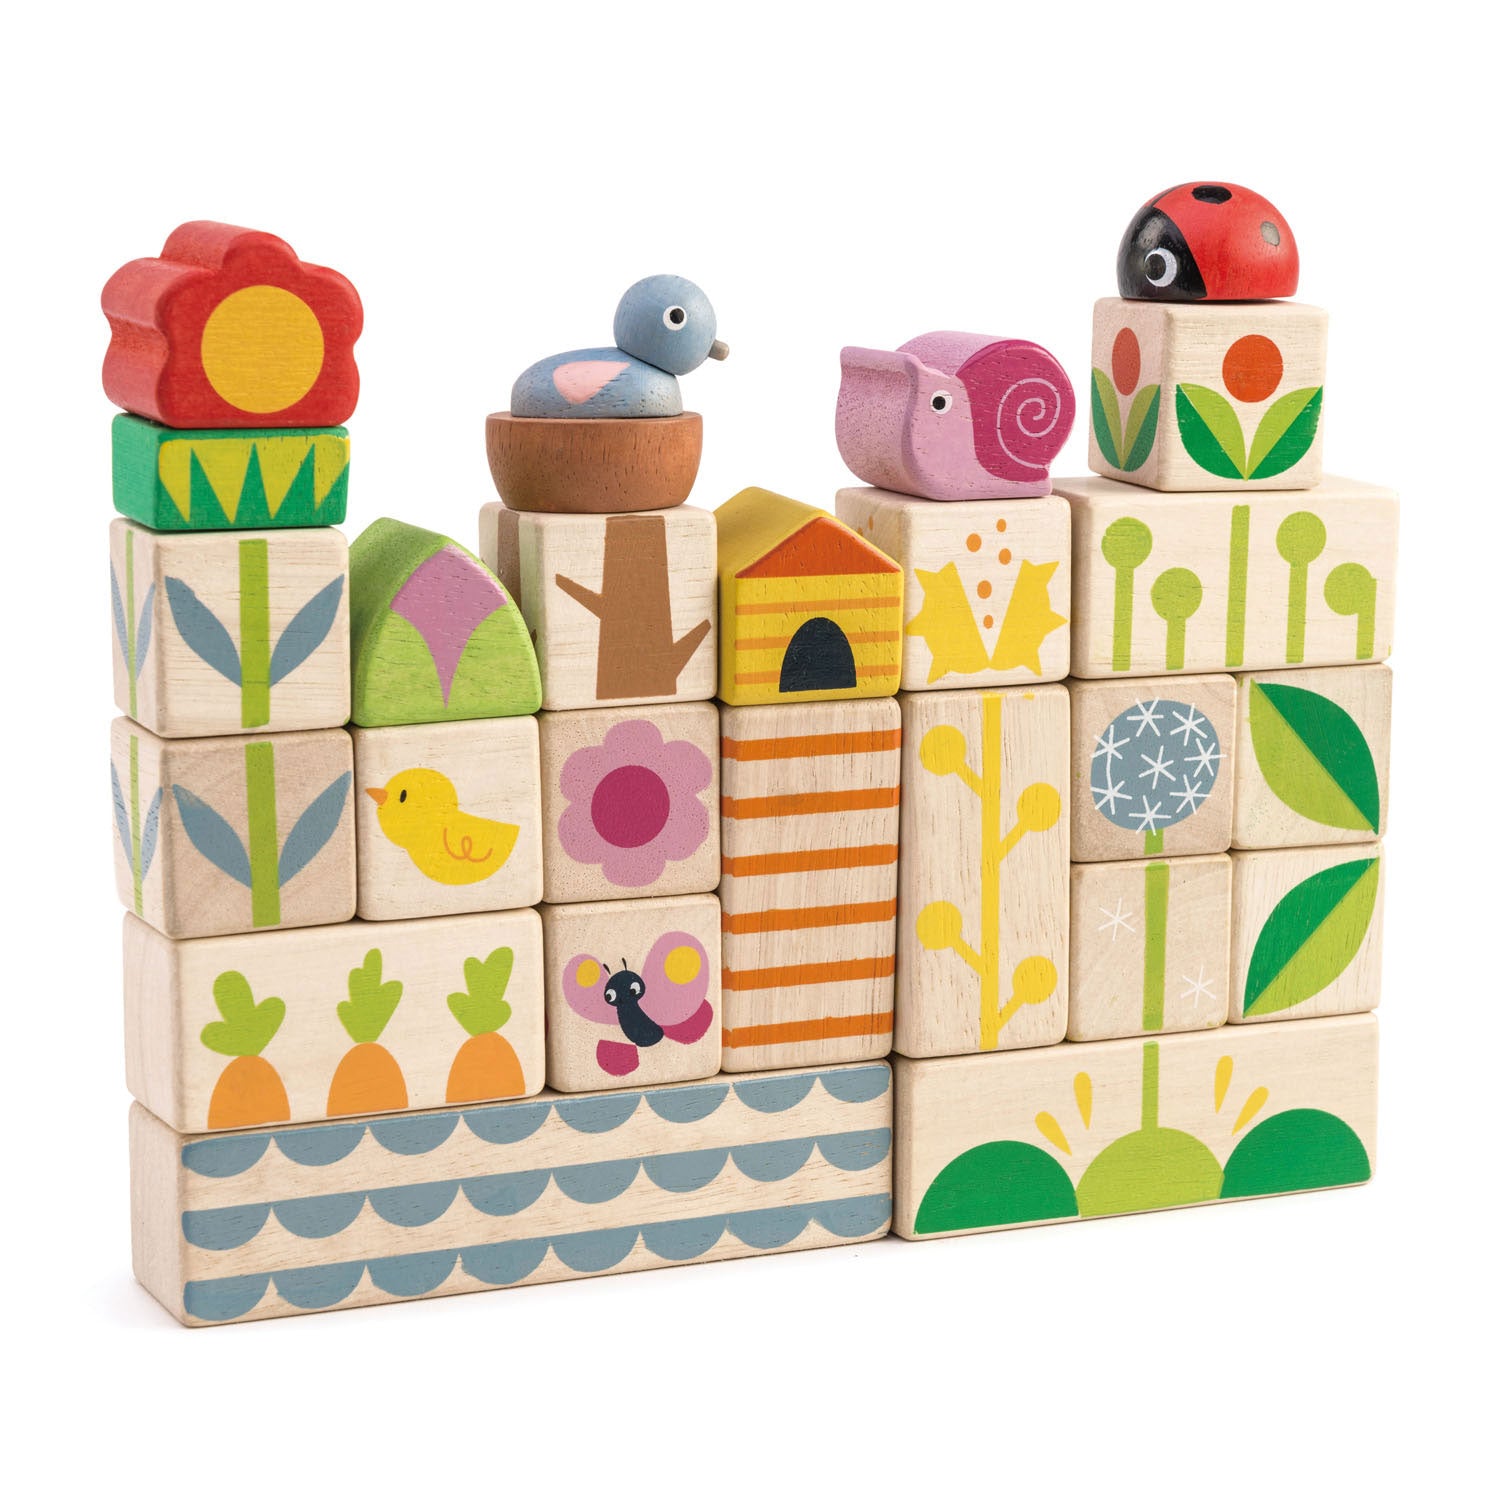 Baby Products Online - Tender Leaf Toys Baby Blocks - wooden